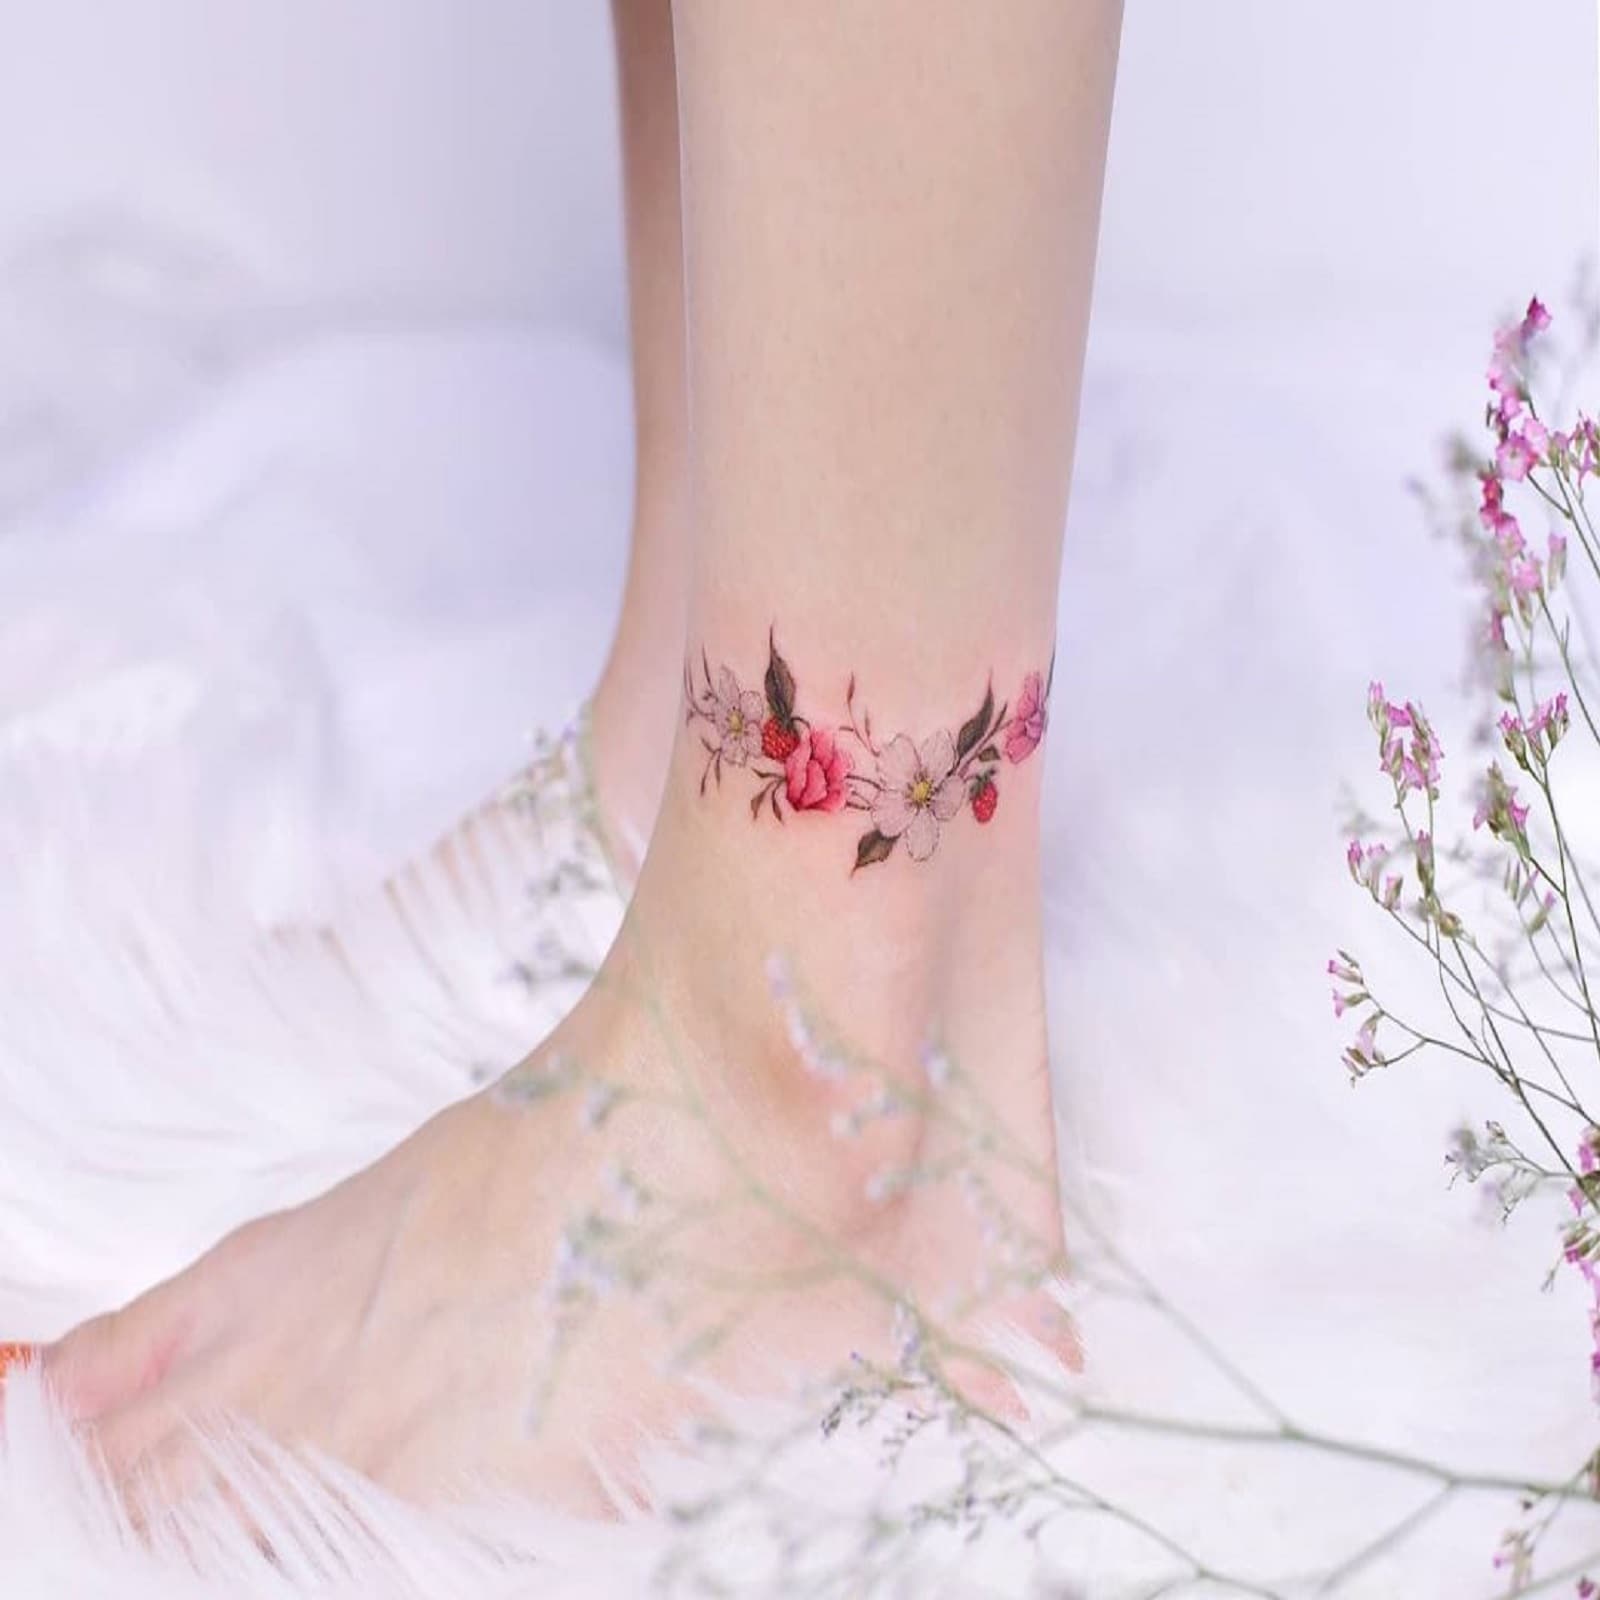 Anklet Tattoo with Initials - Ankle Tattoo for Girls - Ankle Tattoo design  - YouTube